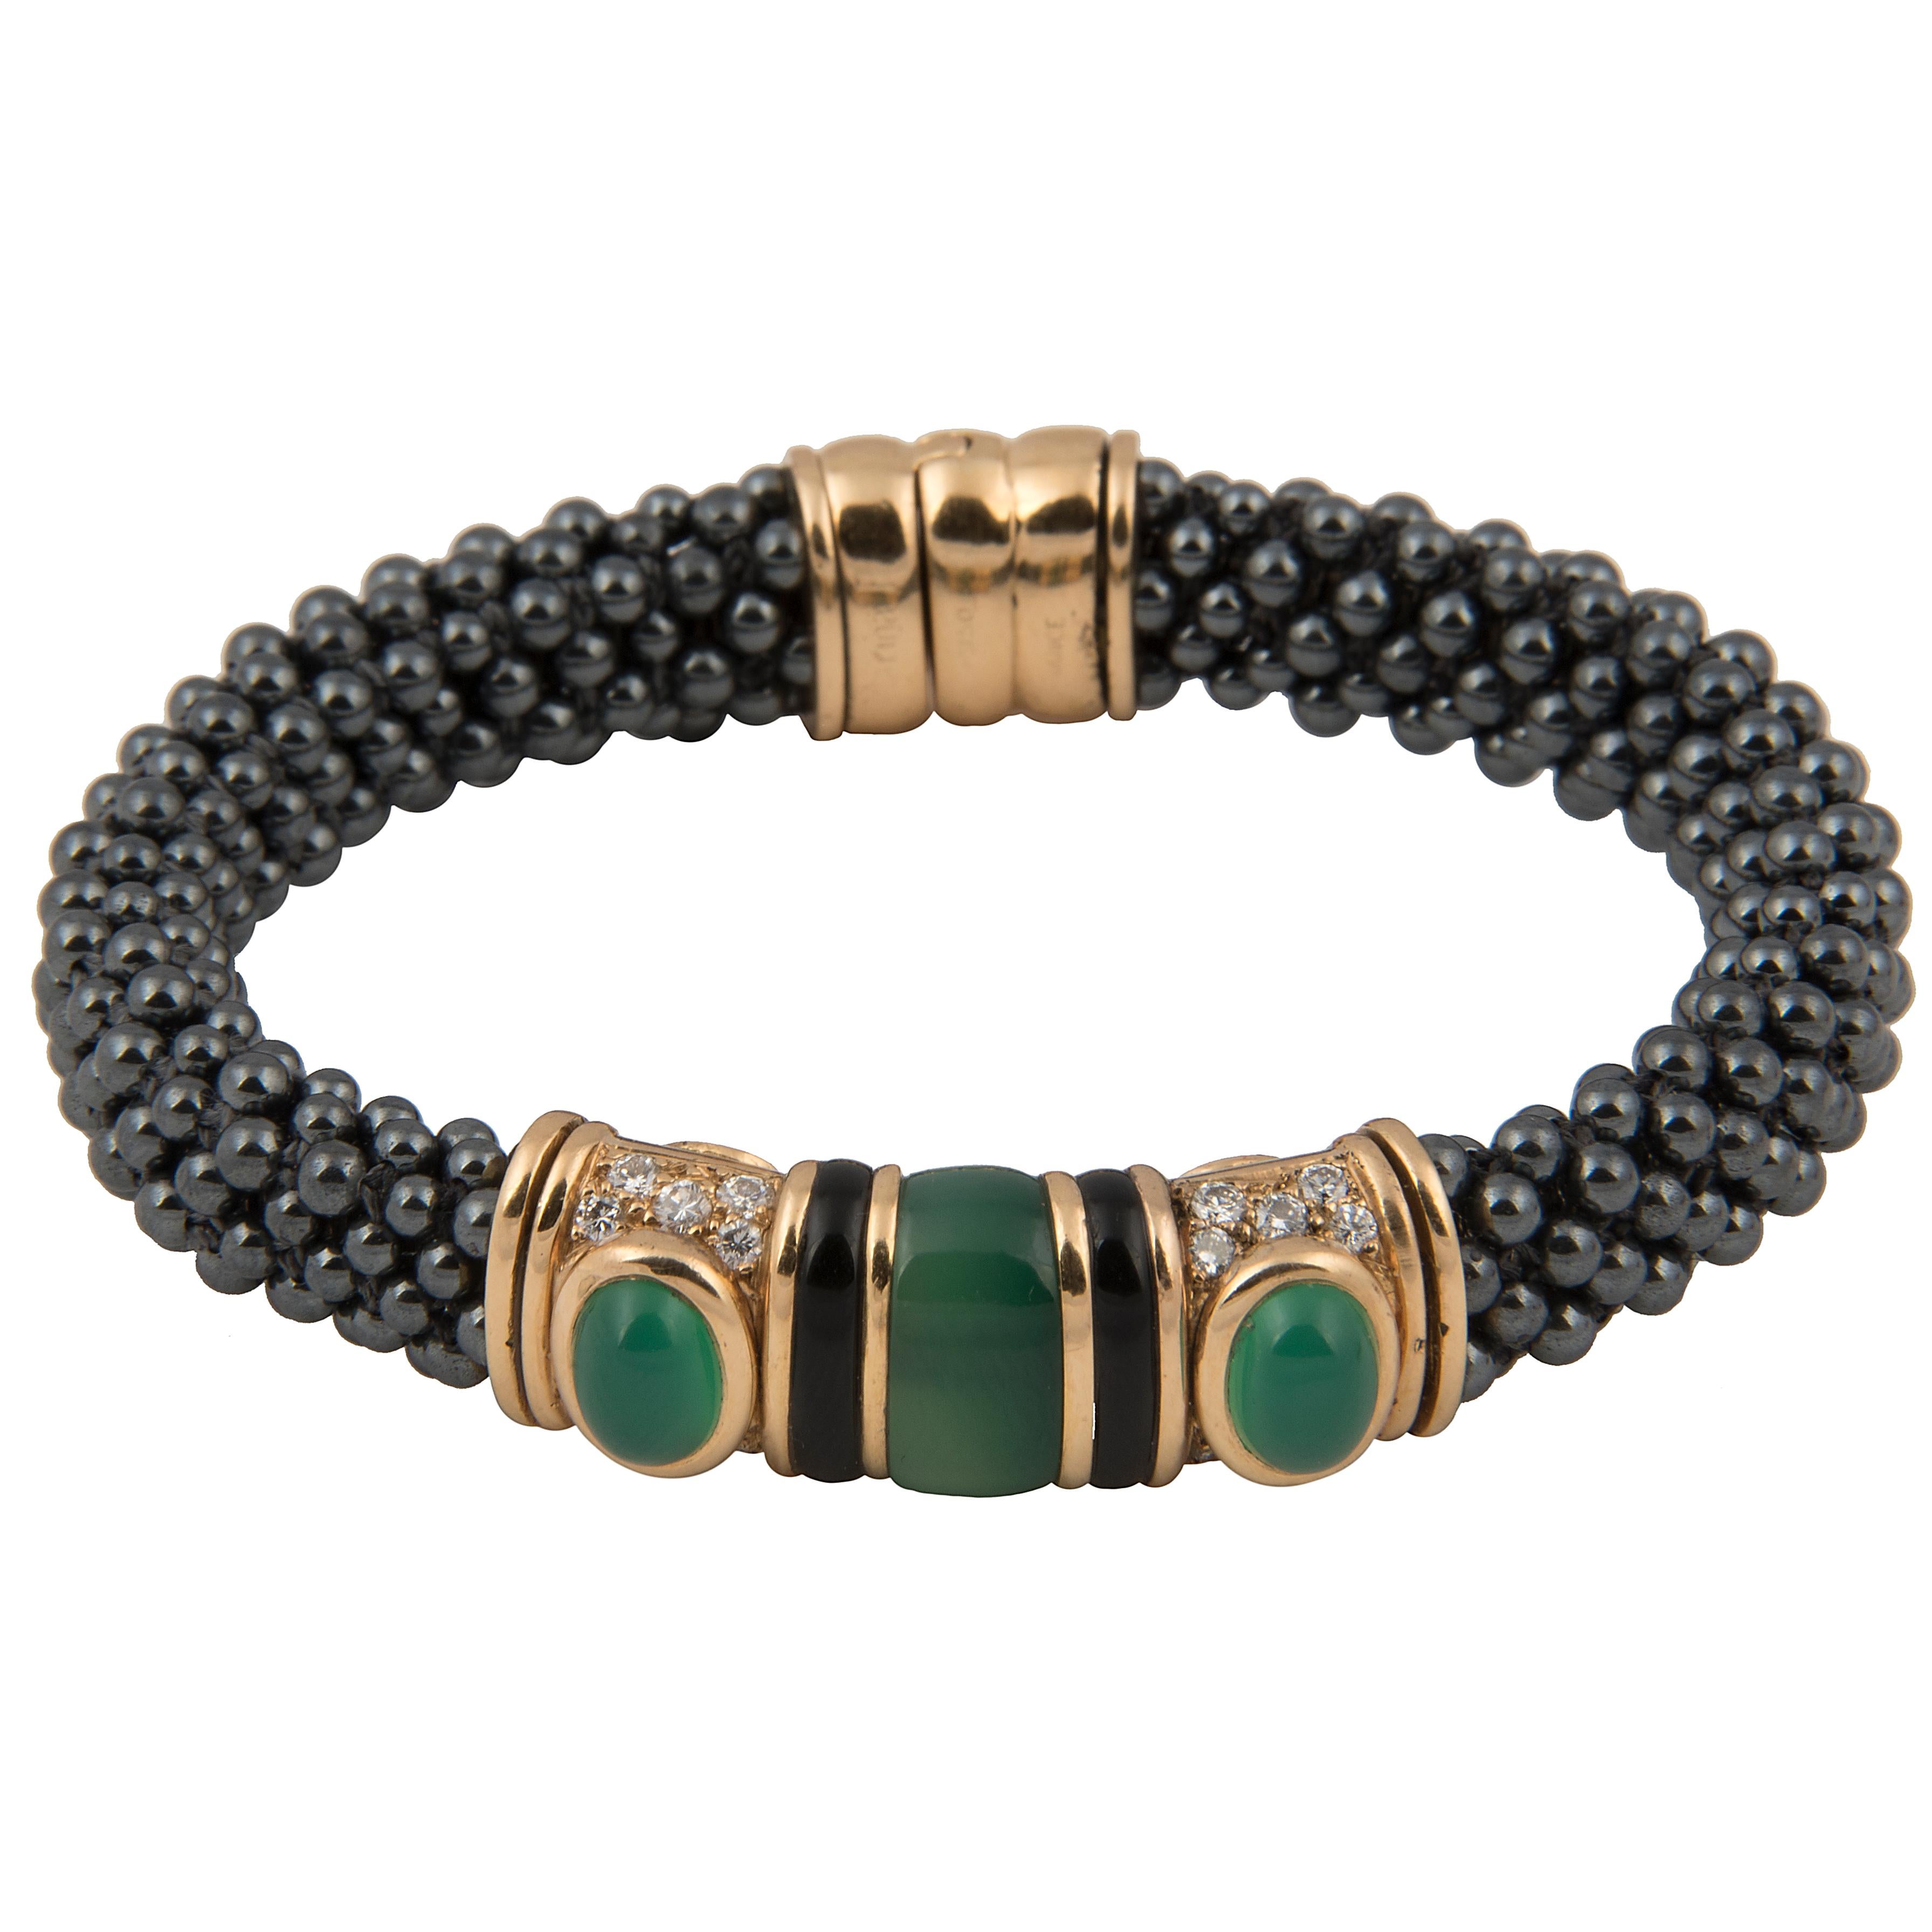 Bangle bracelet designed by Marina B (Bulgari). The band in braided Hematite on a stainless-steel spring, with an 18k yellow gold motif with onyx, pavé set diamonds and cabochon chrysophrase.
Signed Marina B, Maker's mark, French hallmarks and